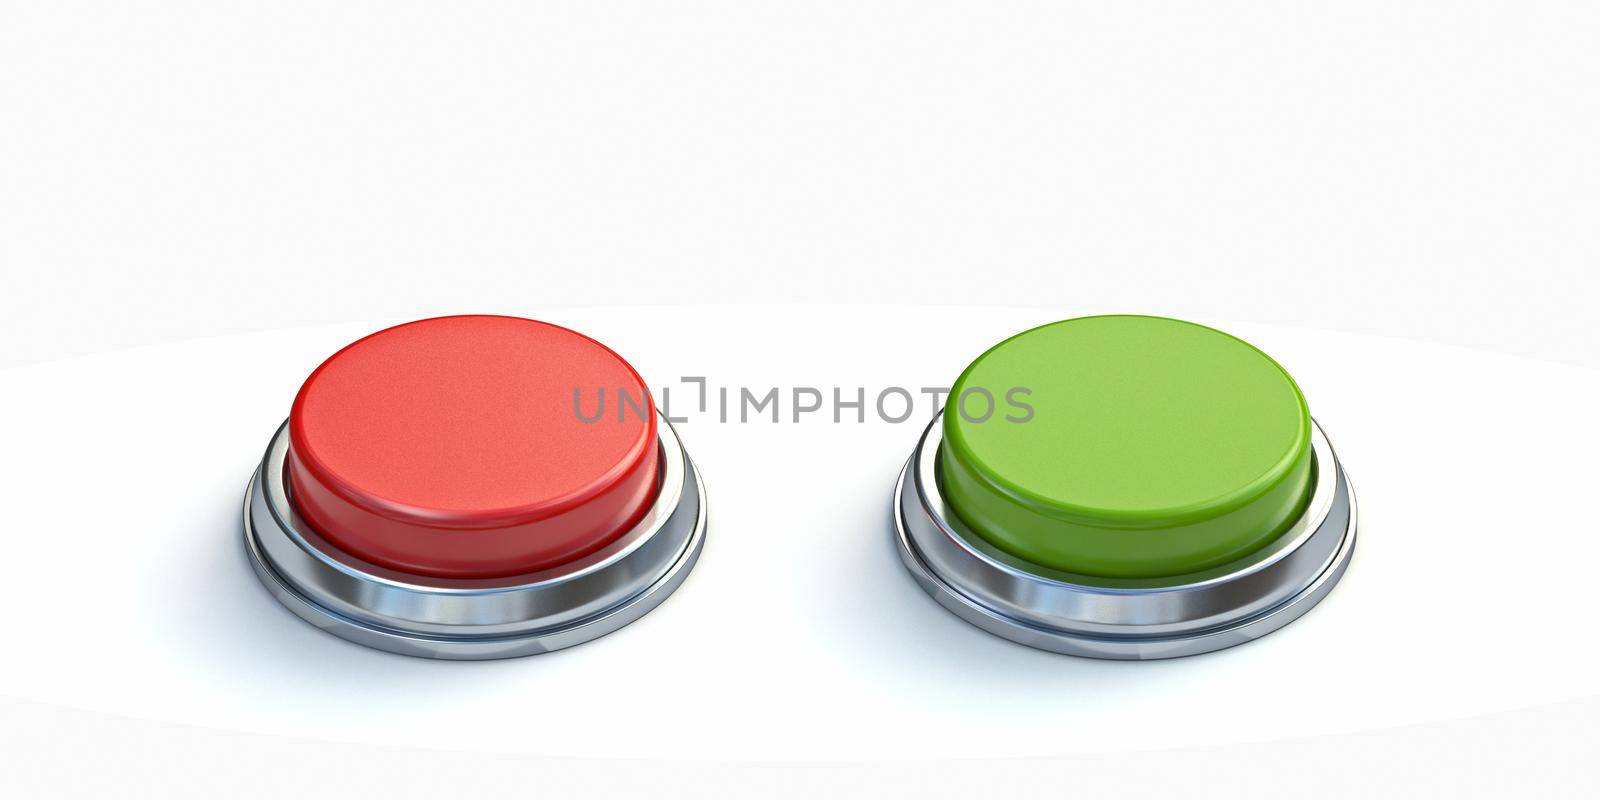 Red and green buttons made of metal and plastic 3D rendering illustration isolated on white background